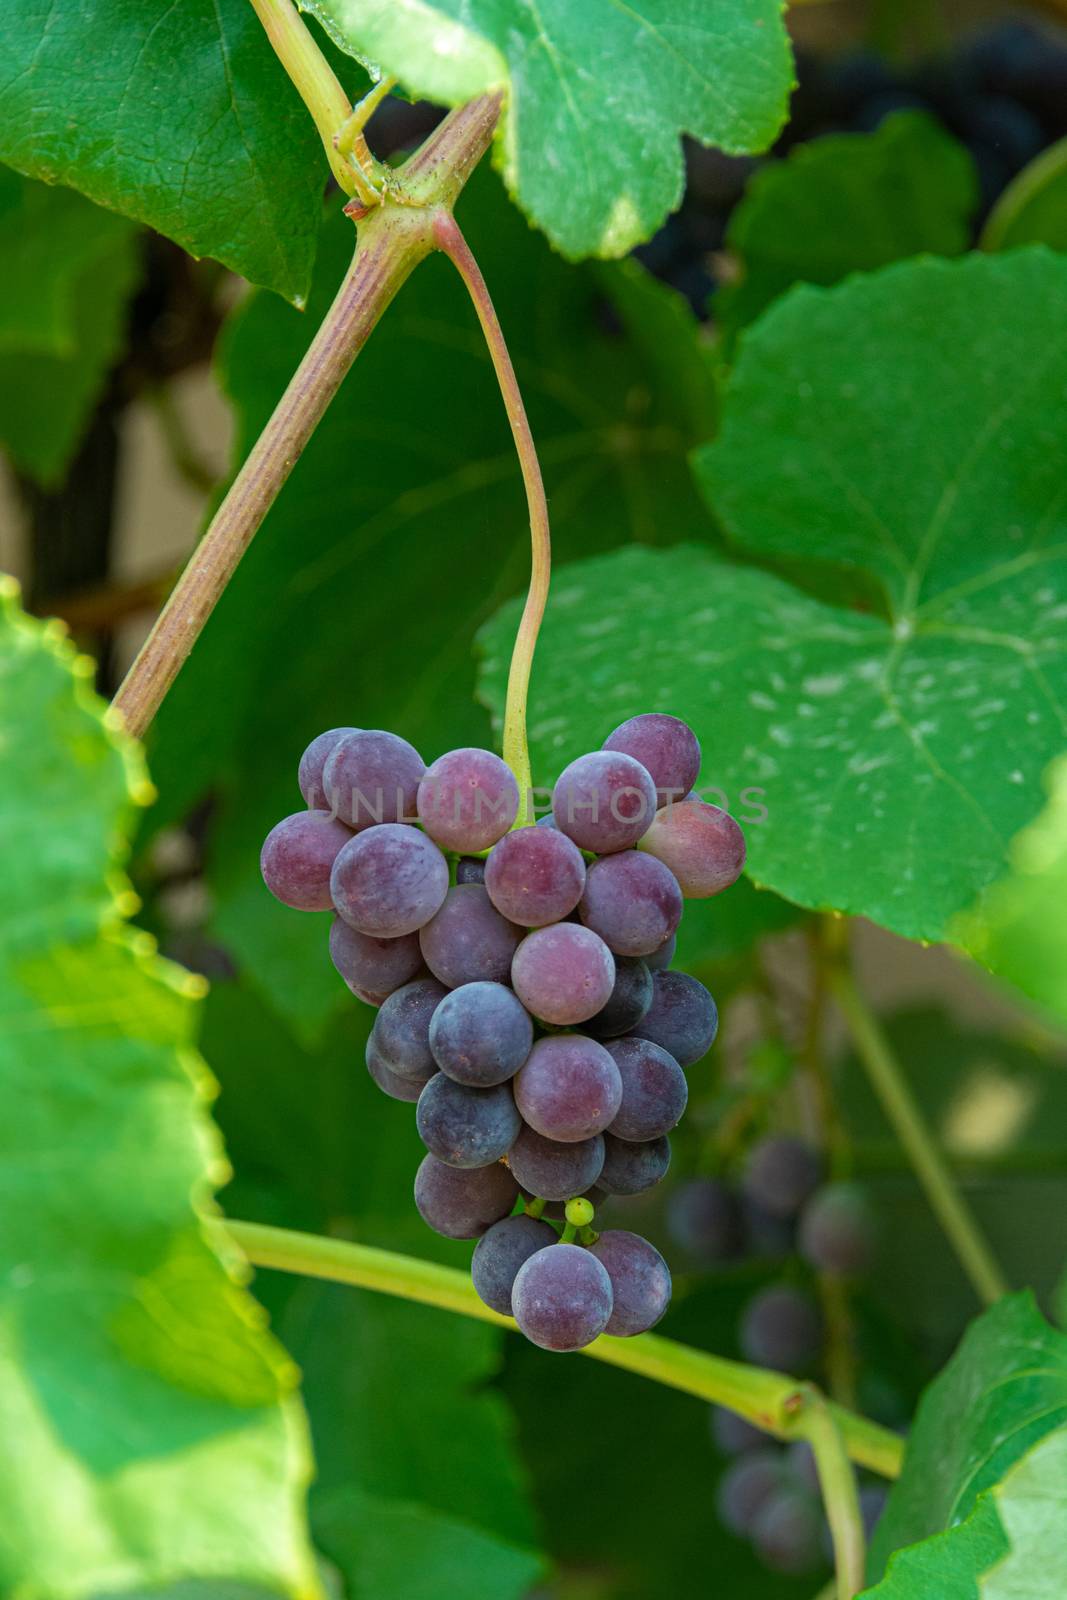 Fascicle red grape growing among the leaves. Vine branch with racemules of red grape